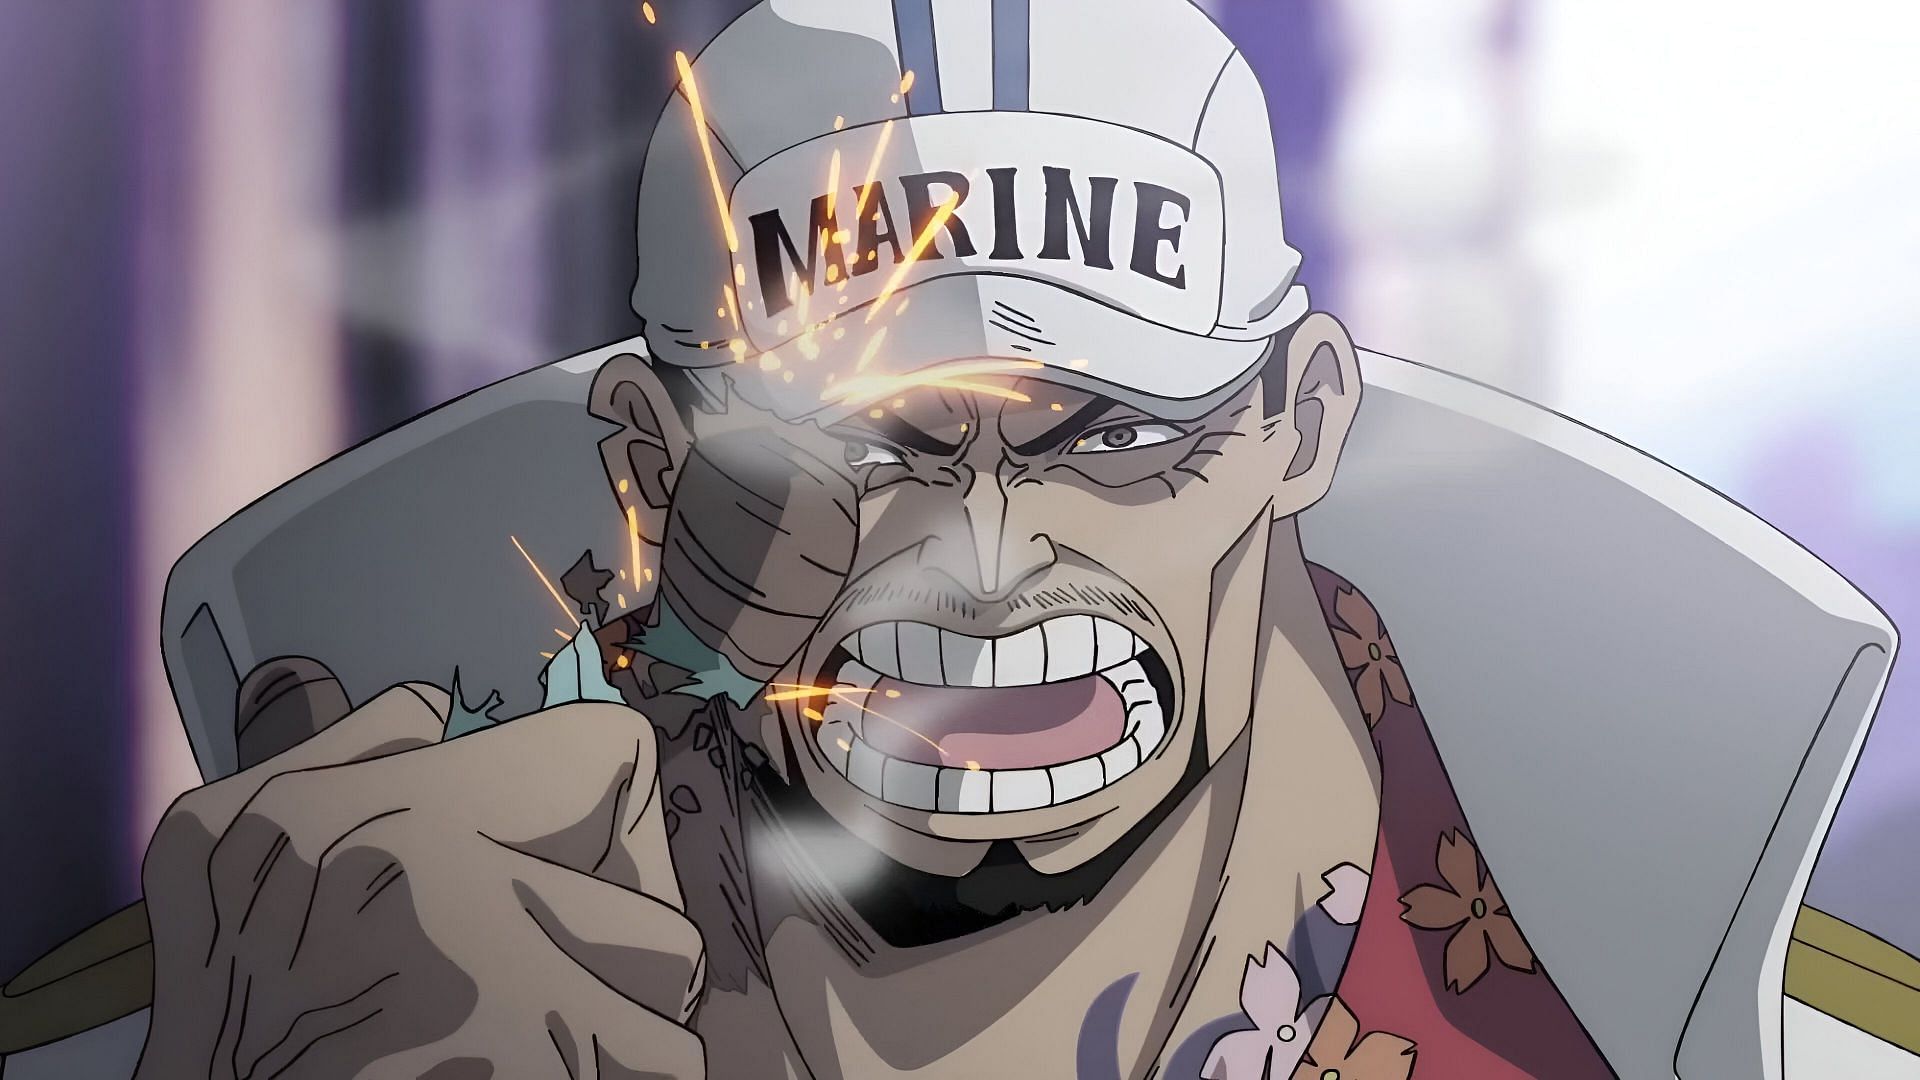 Akainu could side with Dragon in One Piece